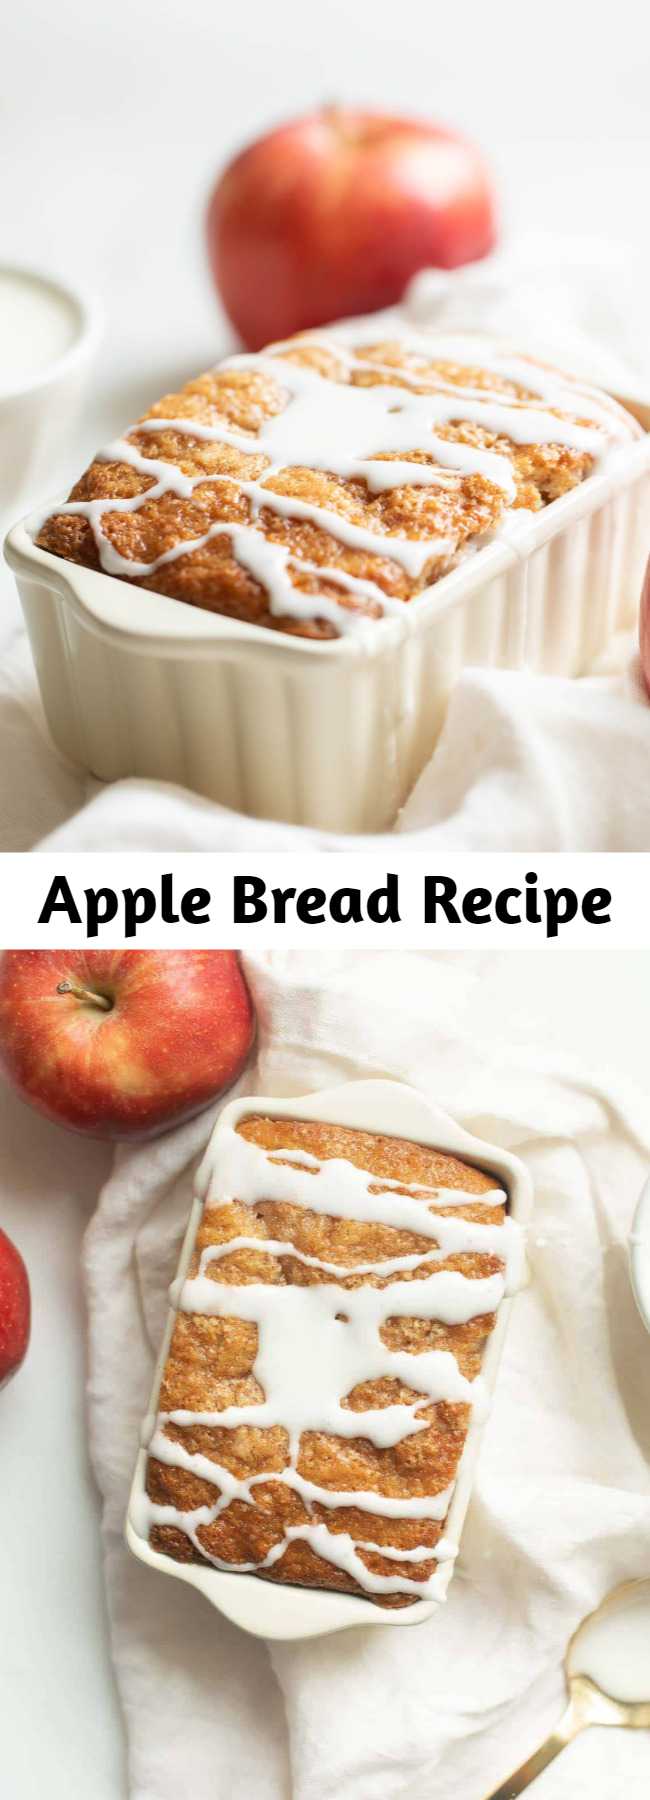 Apple Bread Recipe - This apple cinnamon bread recipe yields 6 mini loaves, making it great for both indulging and gifting! It’s a foolproof no yeast quickbread that takes just 10 minutes from mixer to oven requires only staple ingredients. How is that for easy fall flavor? #applebread #sweetbread #apple #bread #applecinnamonbread #cinnamon #fall #fallrecipe